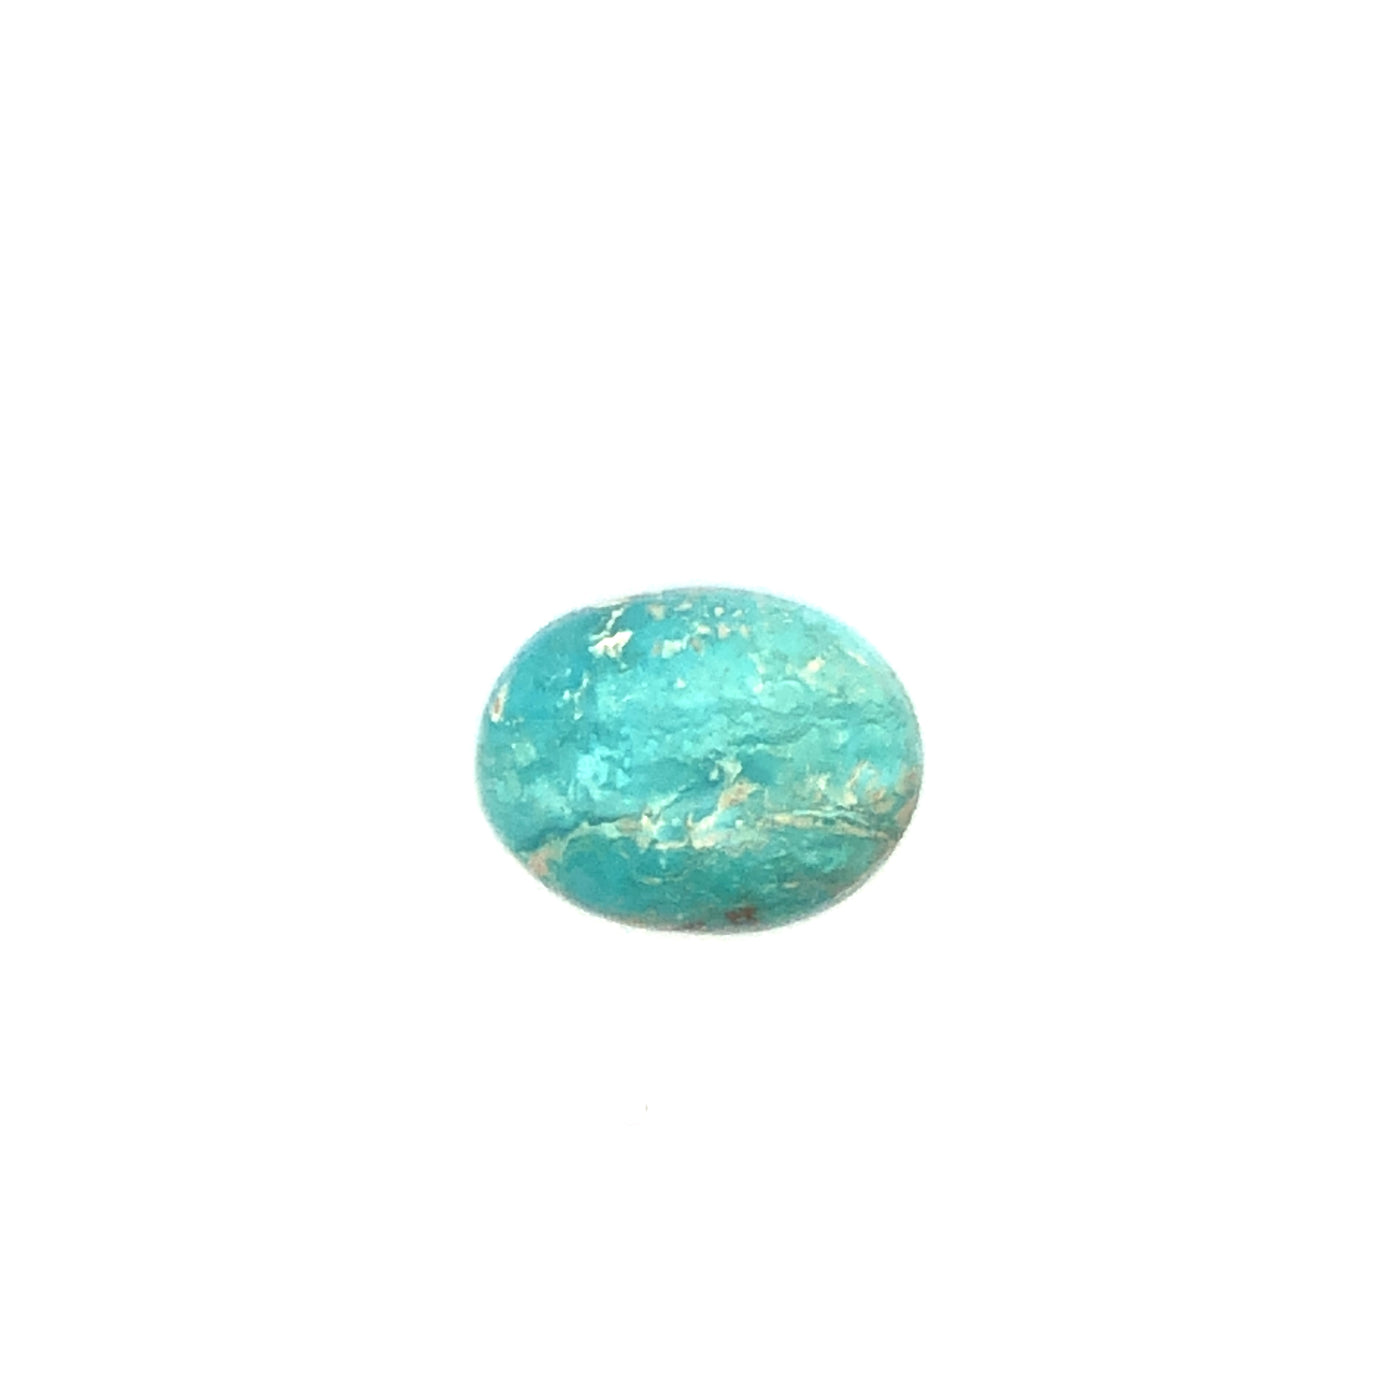 Loose Narooma Turquoise Oval Shaped 17.21Ct Blue With Some White